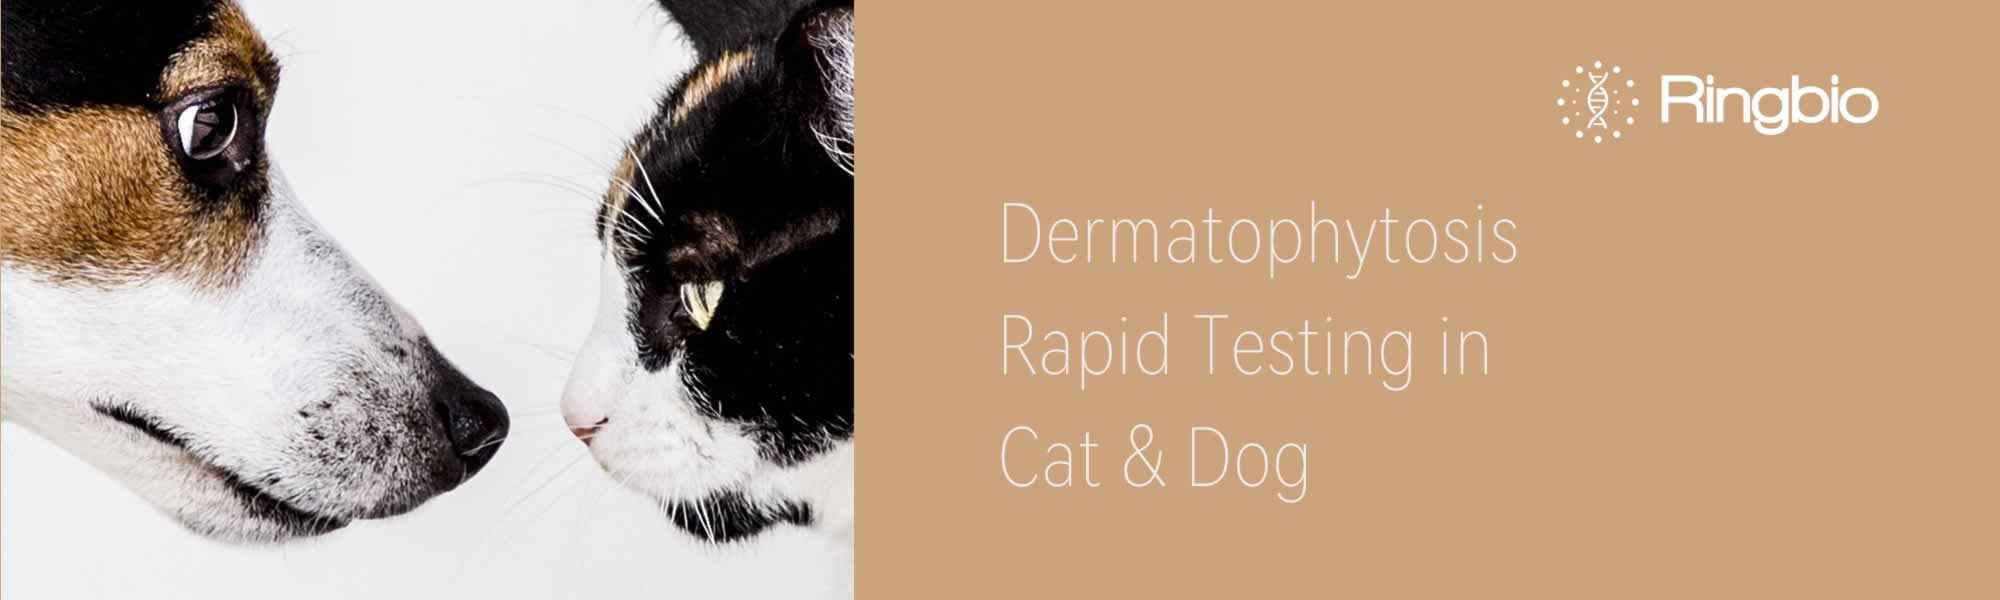 Dermatophytosis Rapid Testing in Cats and Dogs